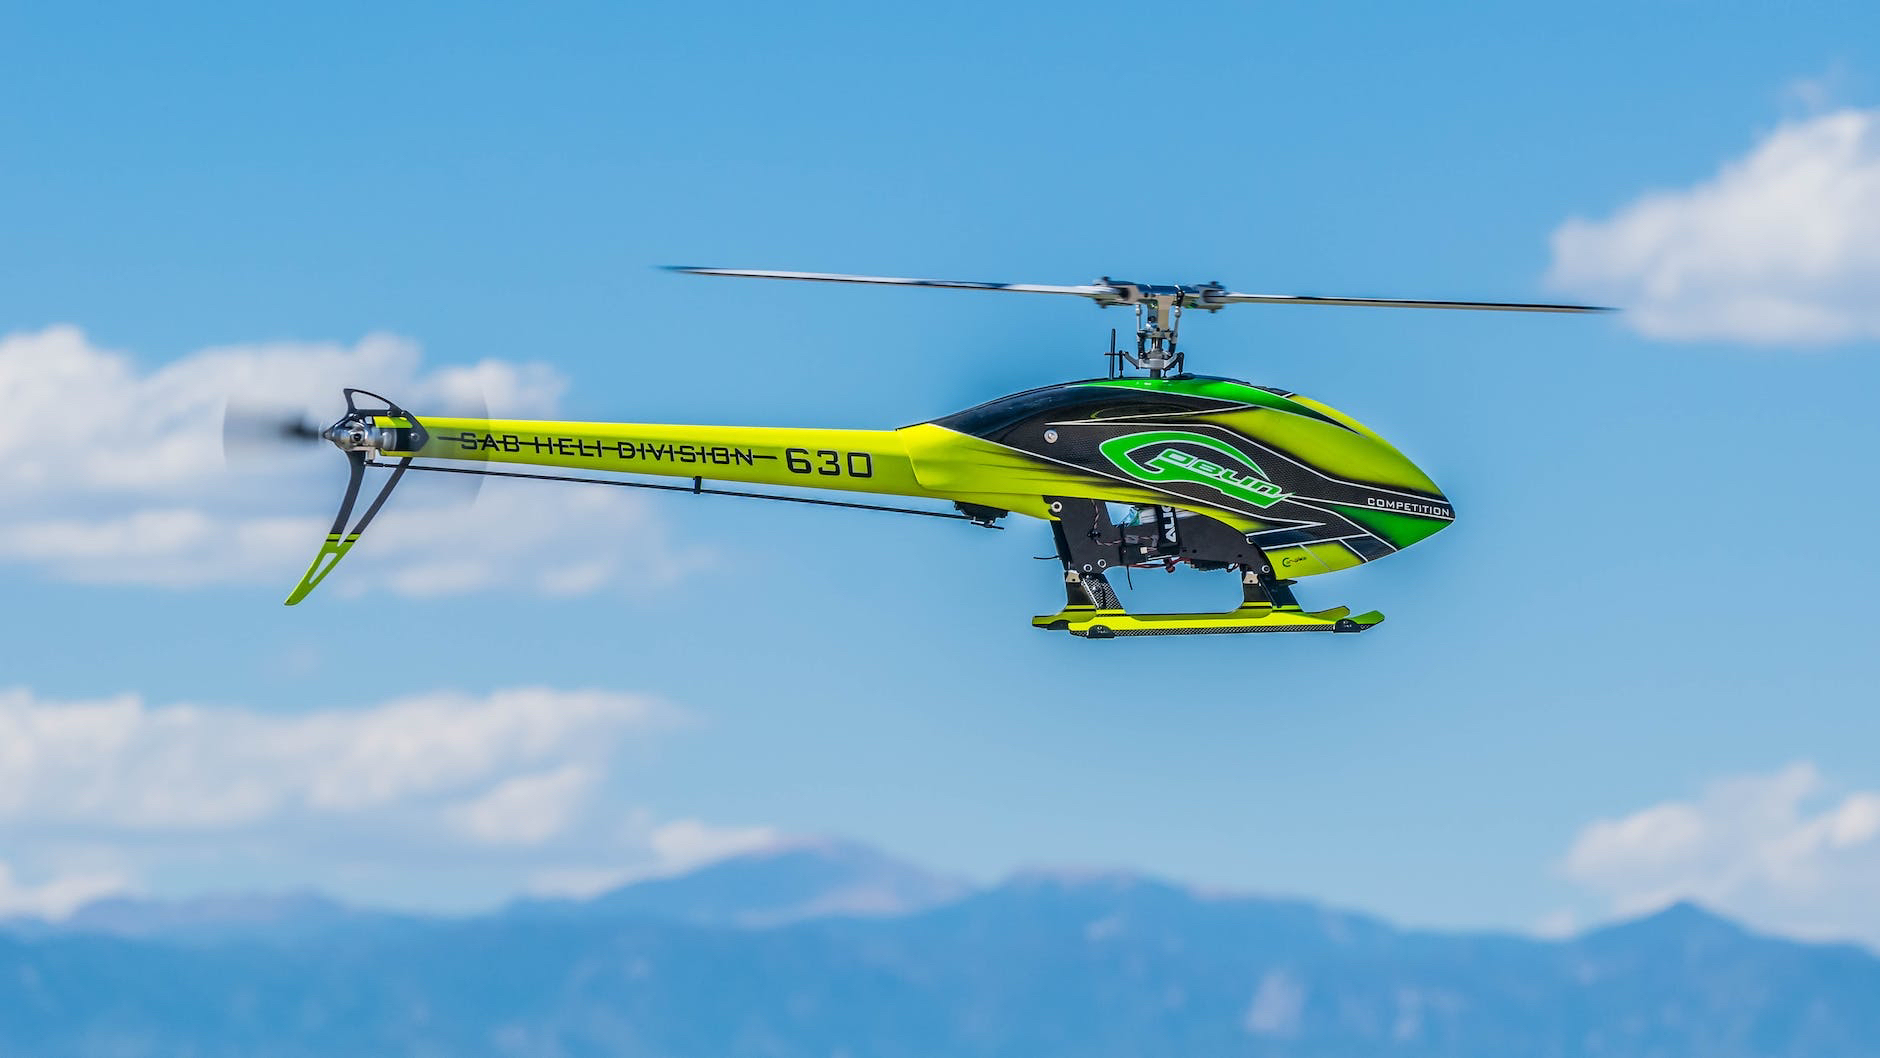 A yellow and green helicopter flying in the air.